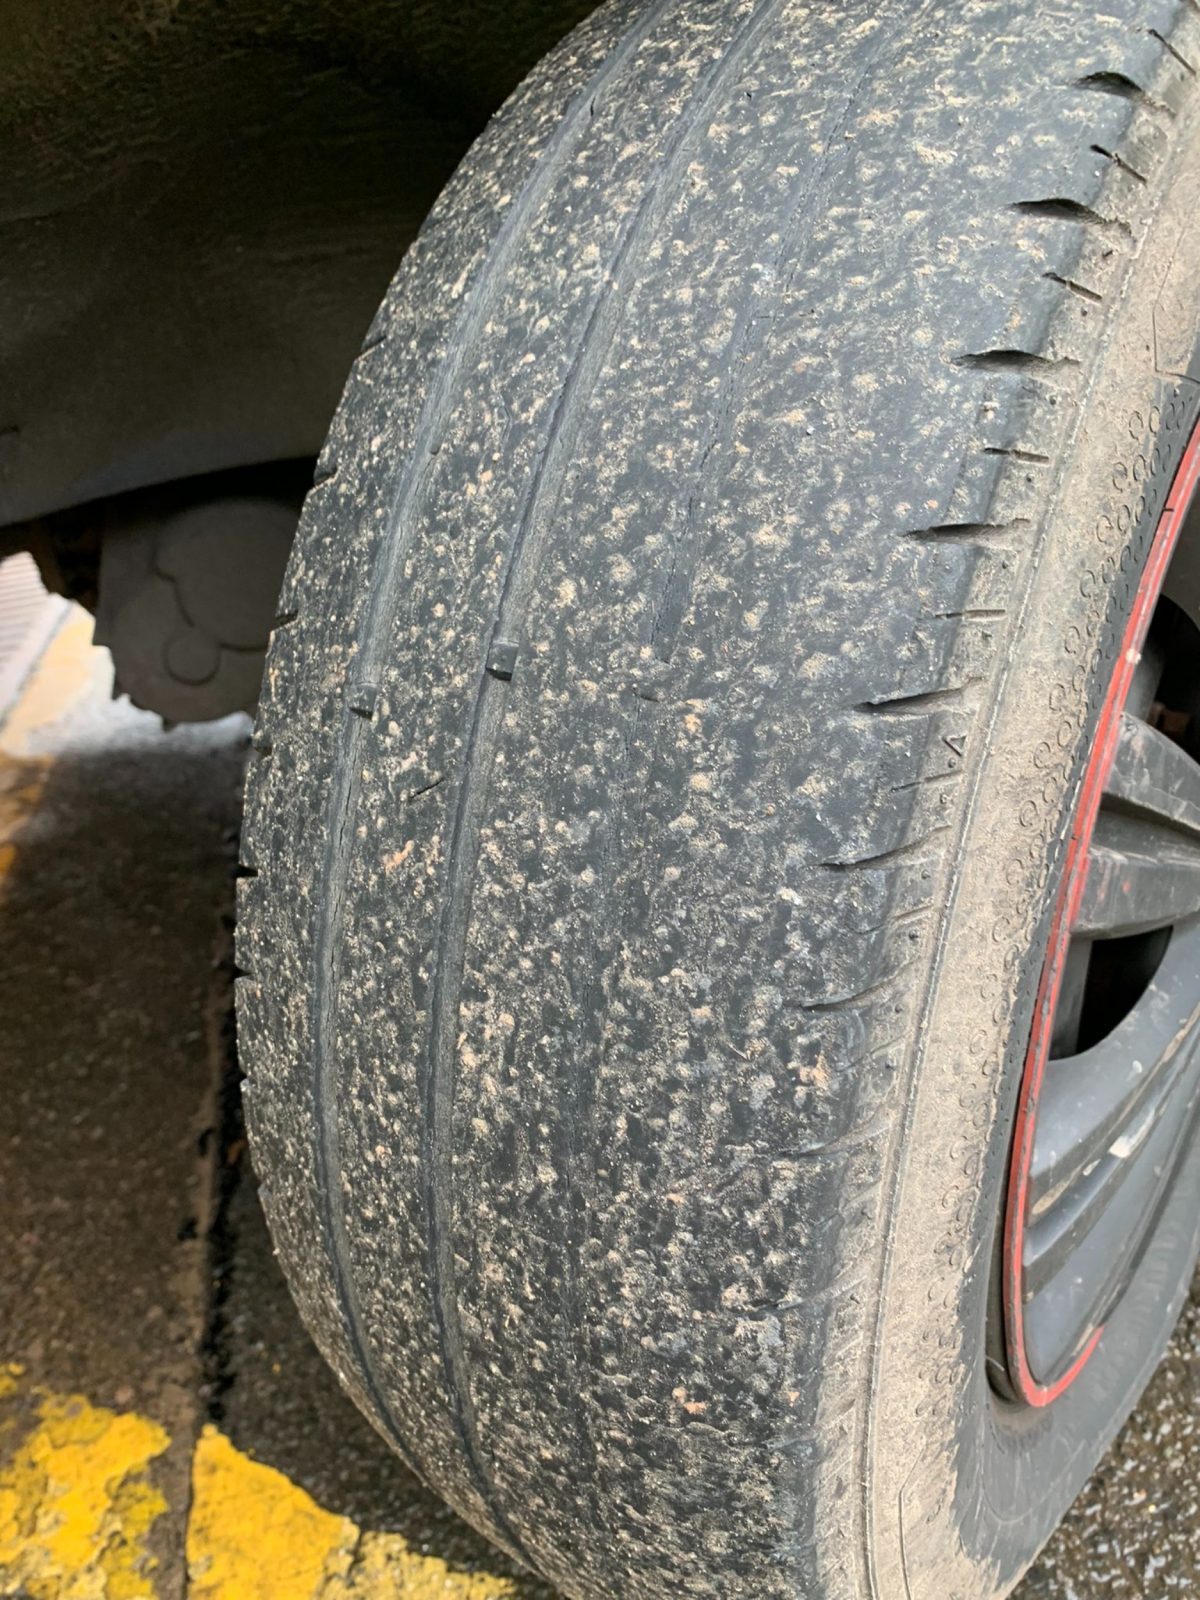 The bald tyre